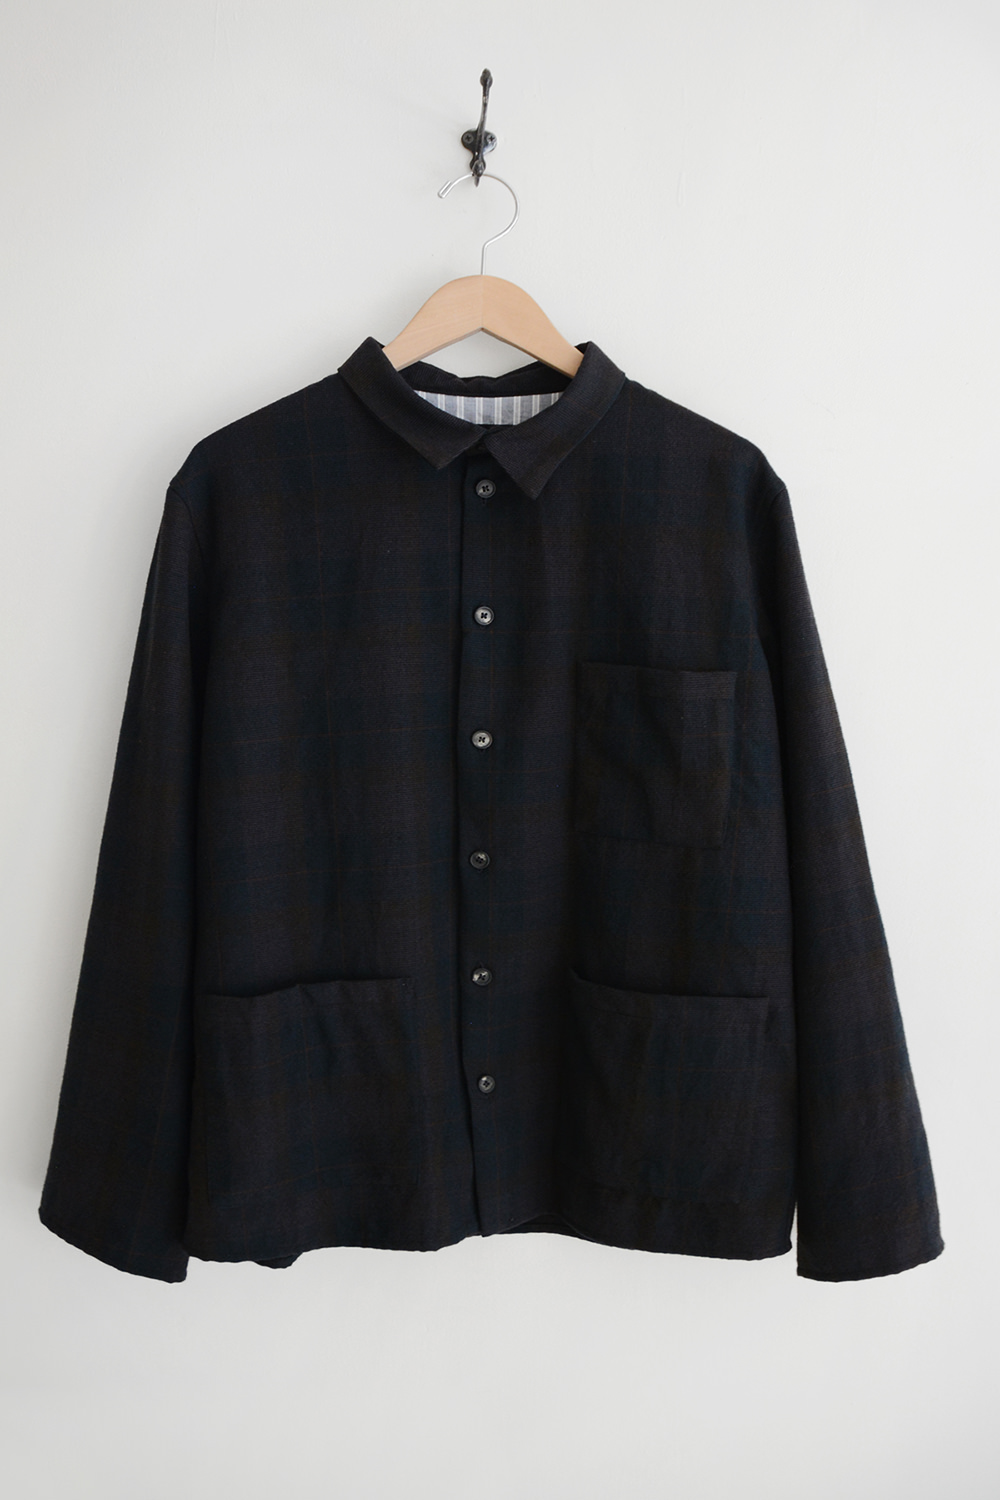 bergfabel worker shirt jacket check top picture